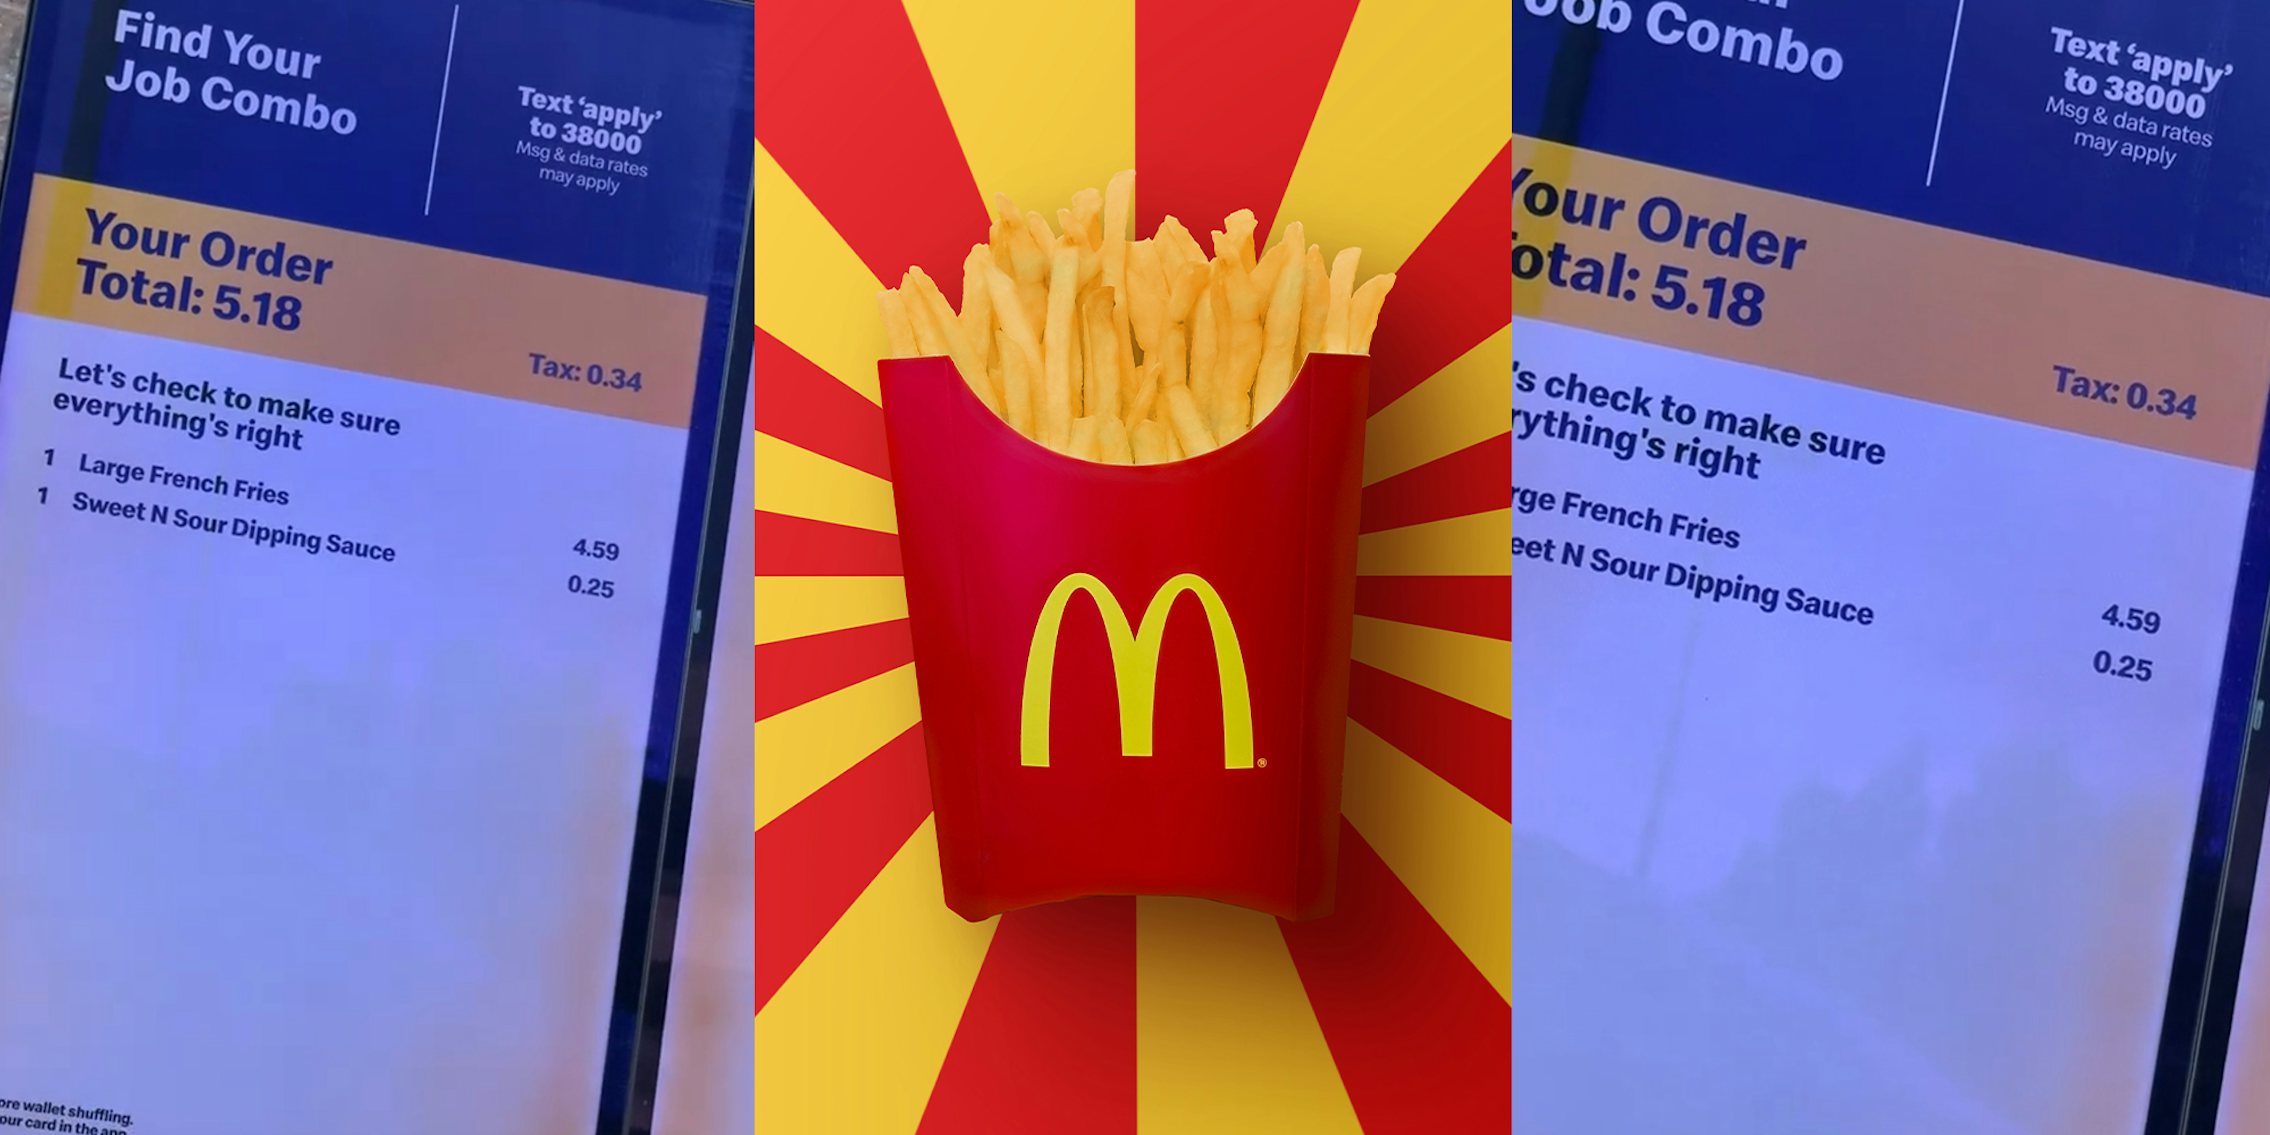 McDonald’s drive-thru customer orders large fry and dipping sauce. It’s $5